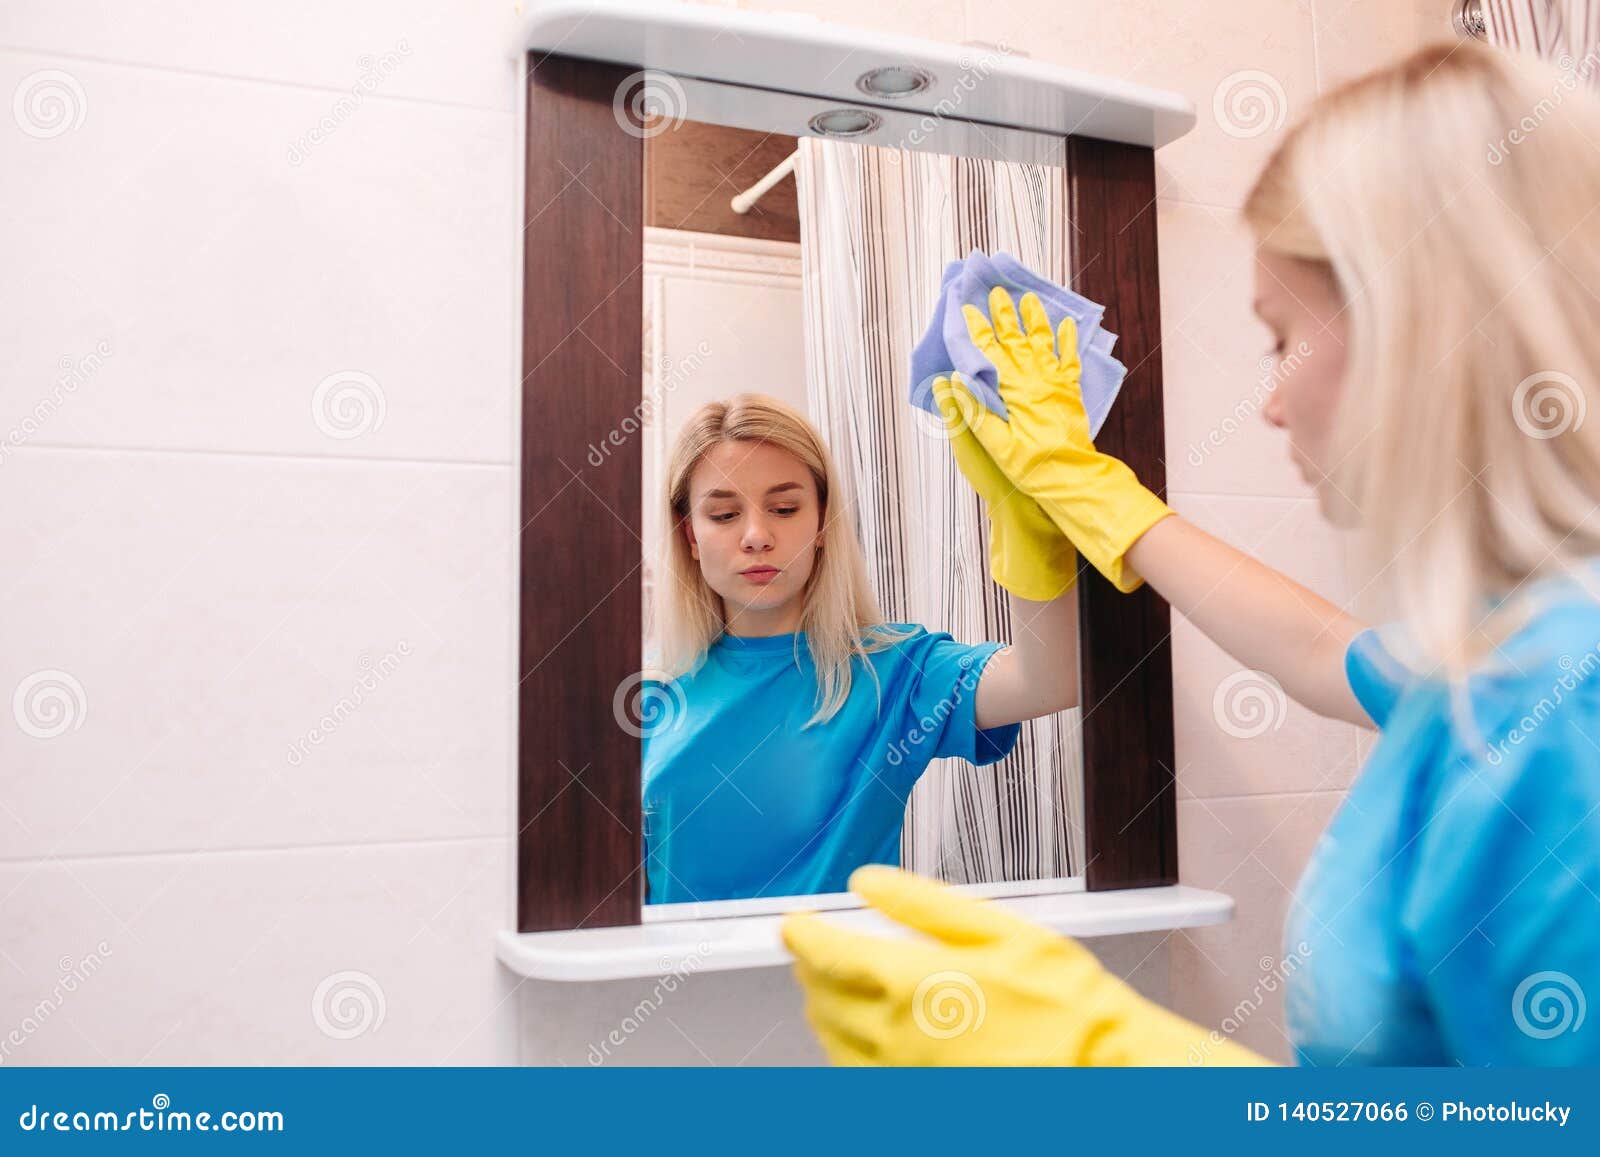 Blonde Girl In Yellow Gloves Cleaning With Spray Mirror At